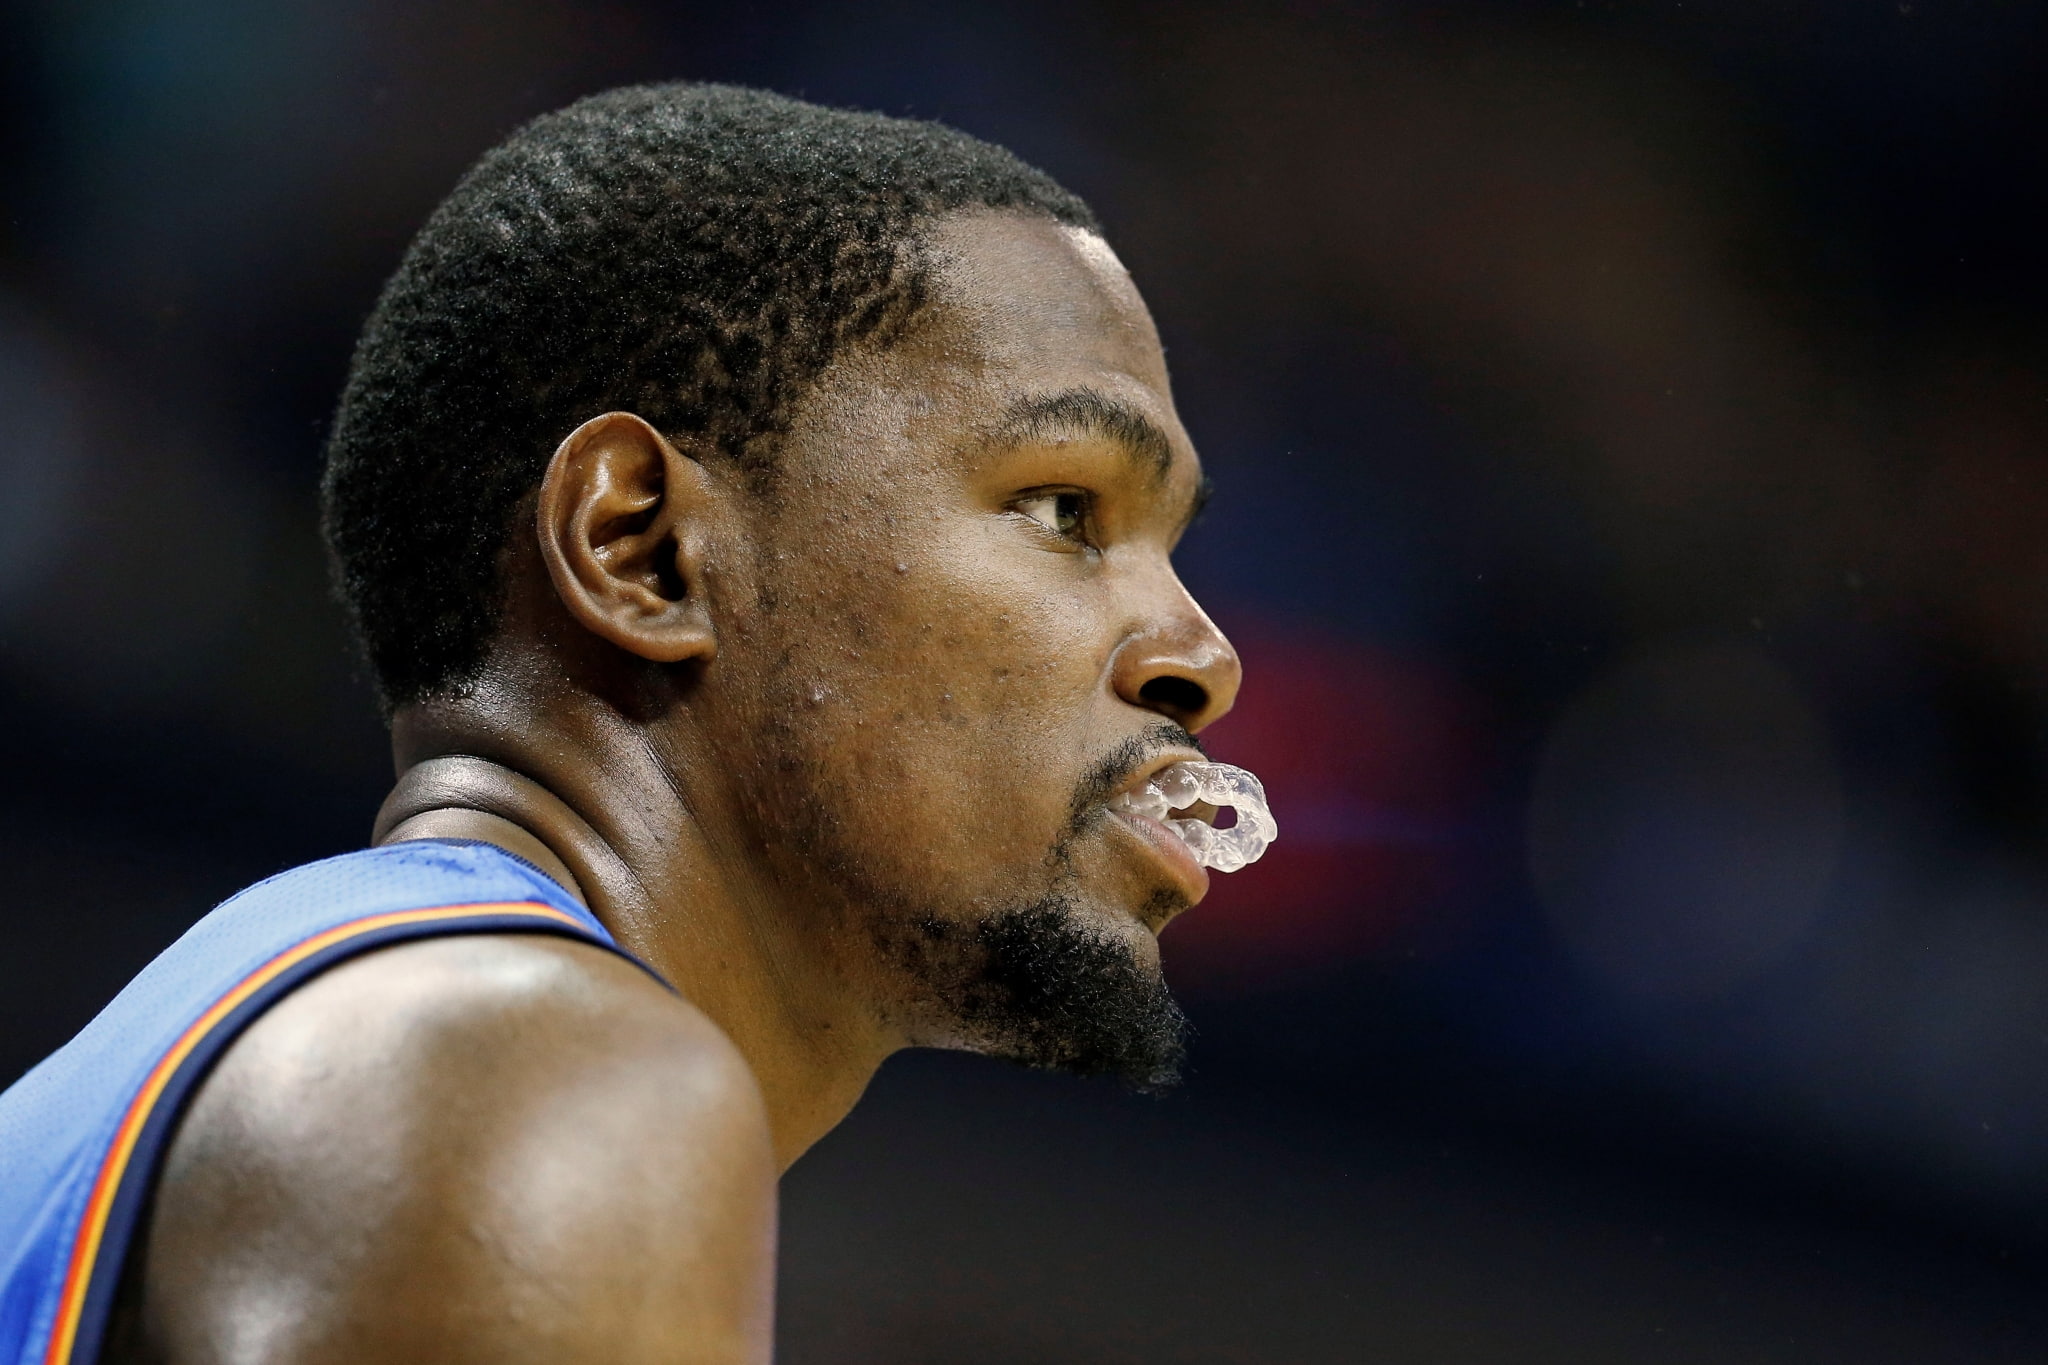 kevin durant hd widescreen  for desktop, headshot, side view